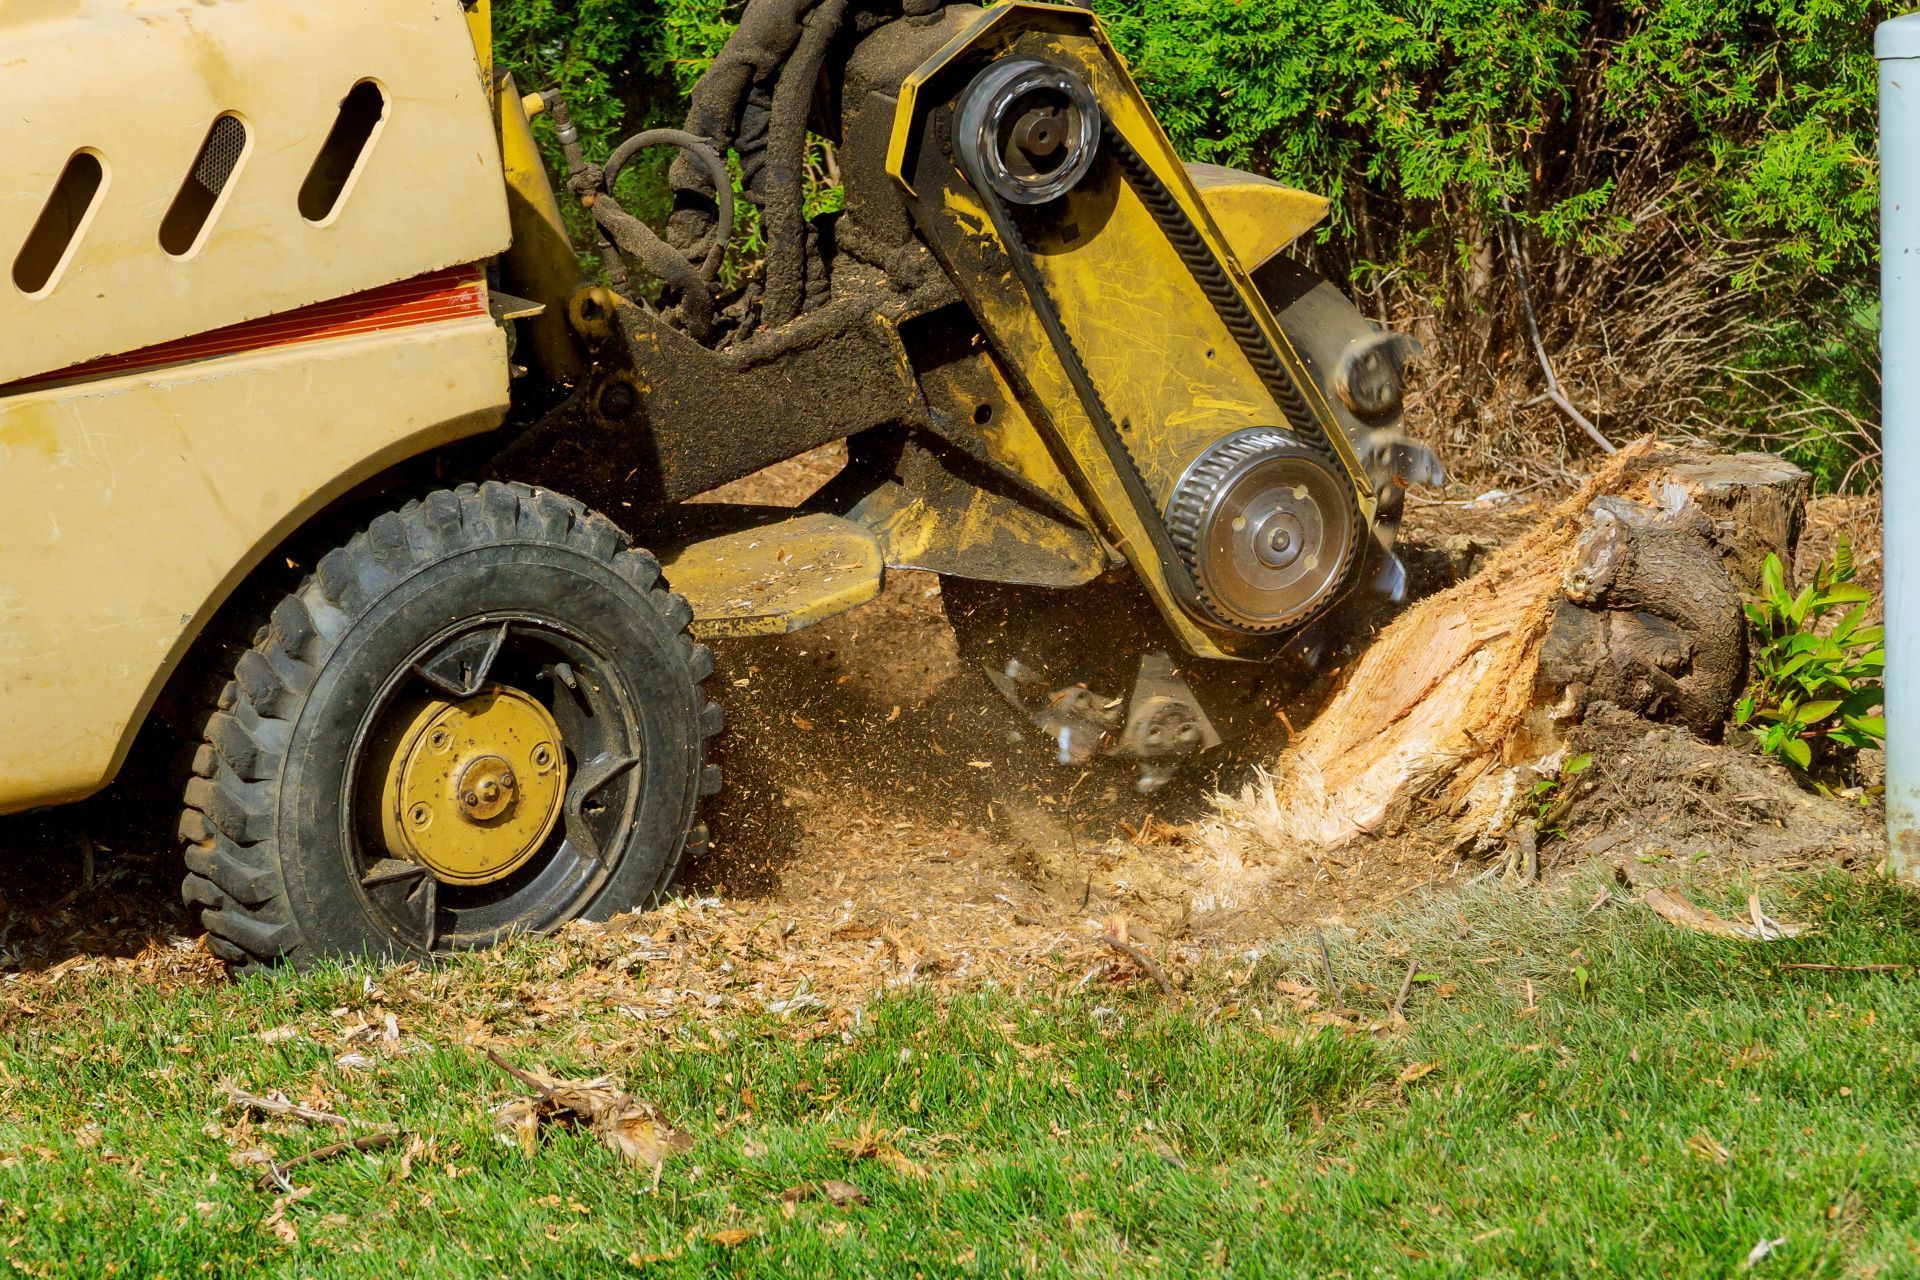 stump grinder in the grinding process outside, bushes in background